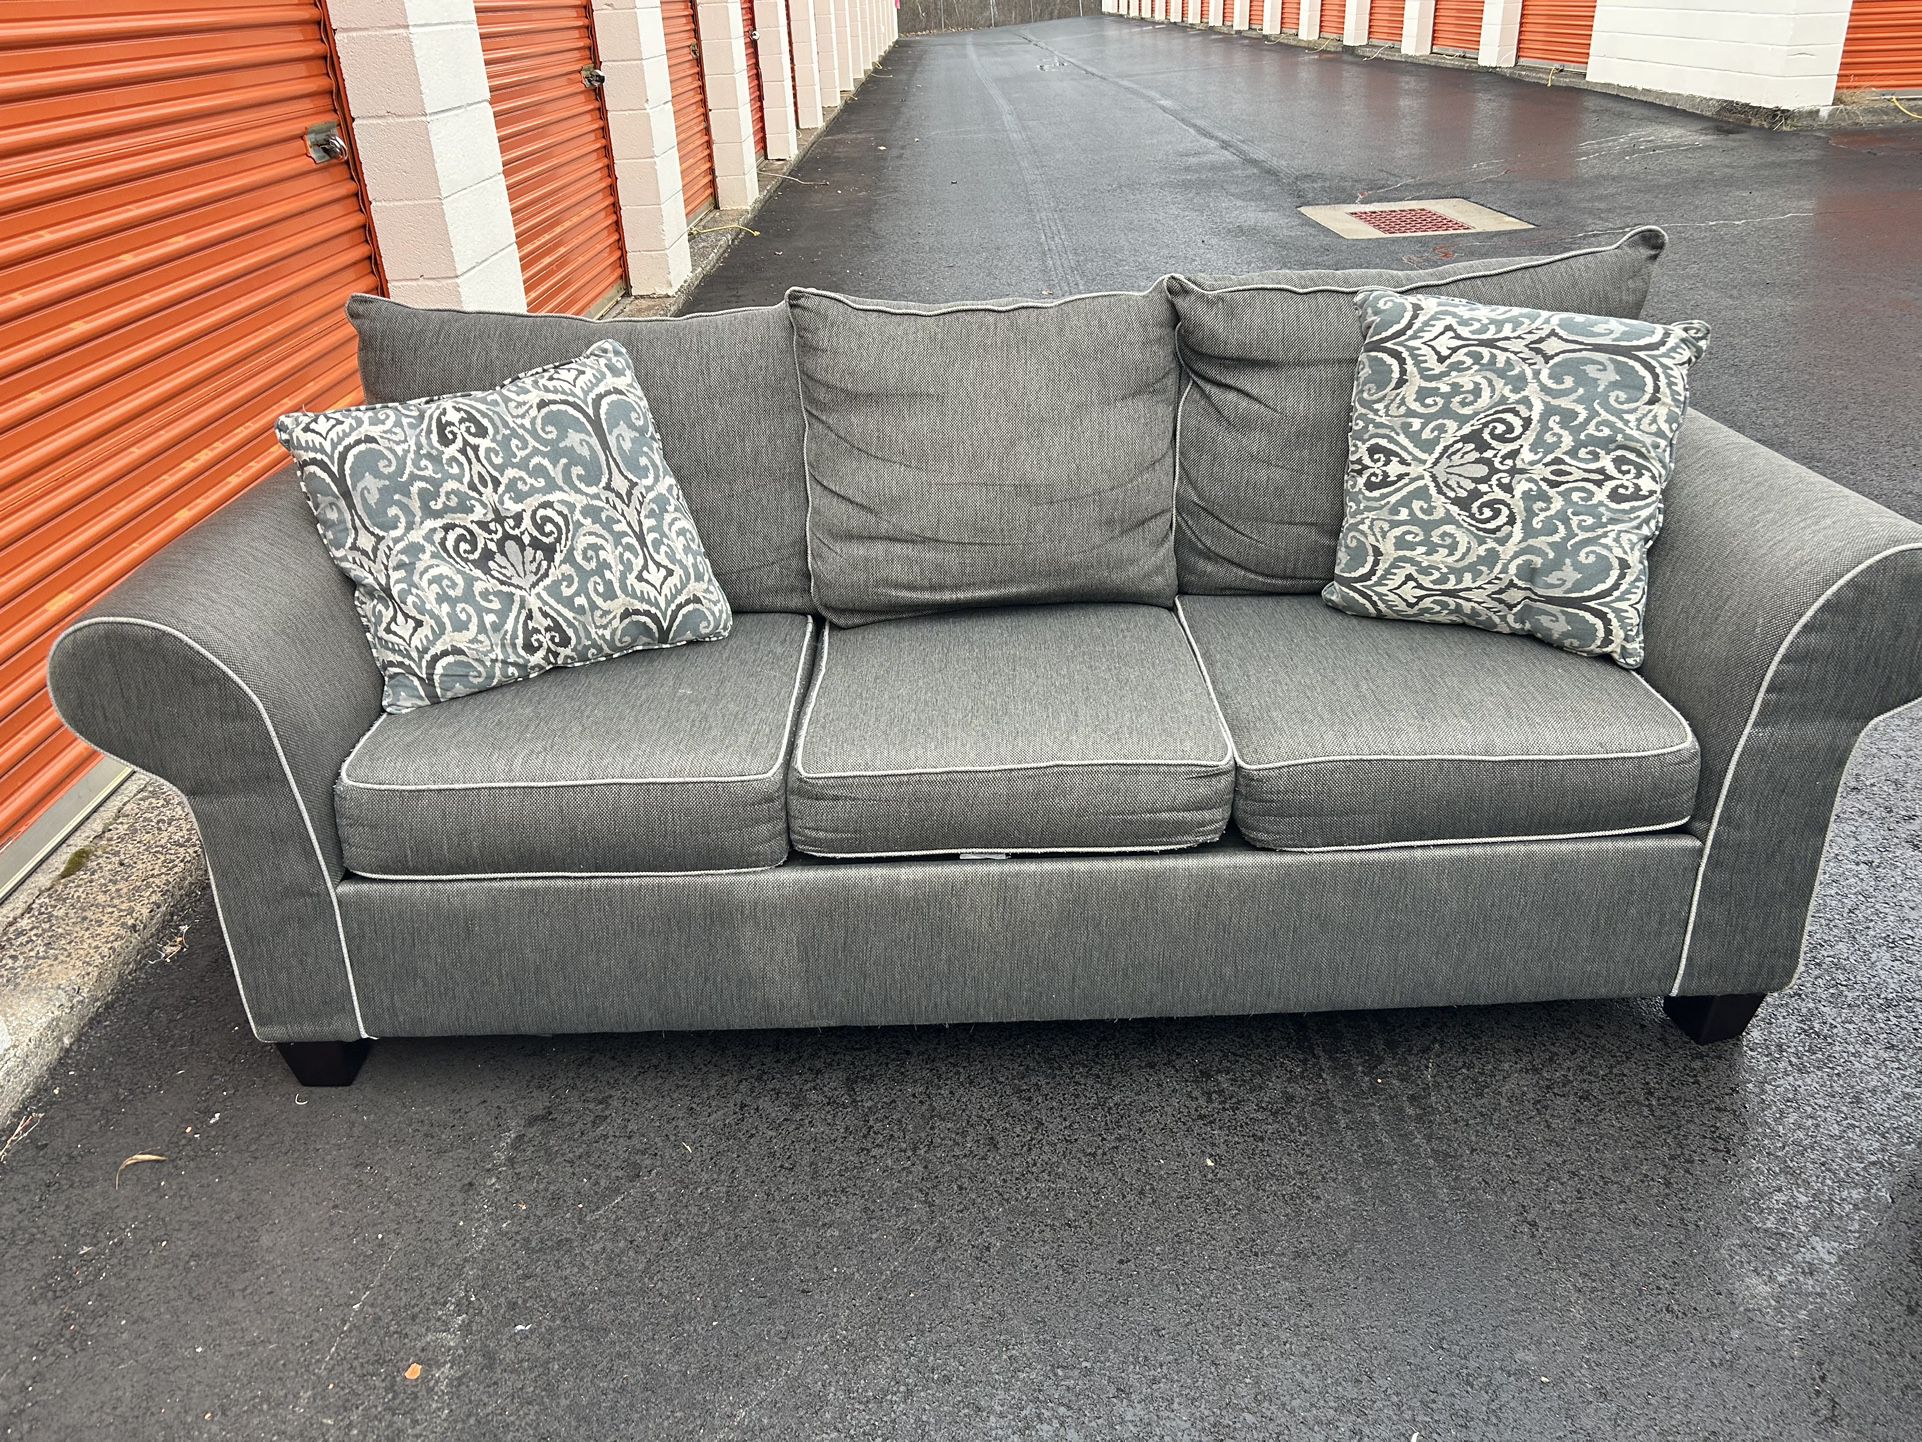 Used In Good Condition Set Of Gray Couches 